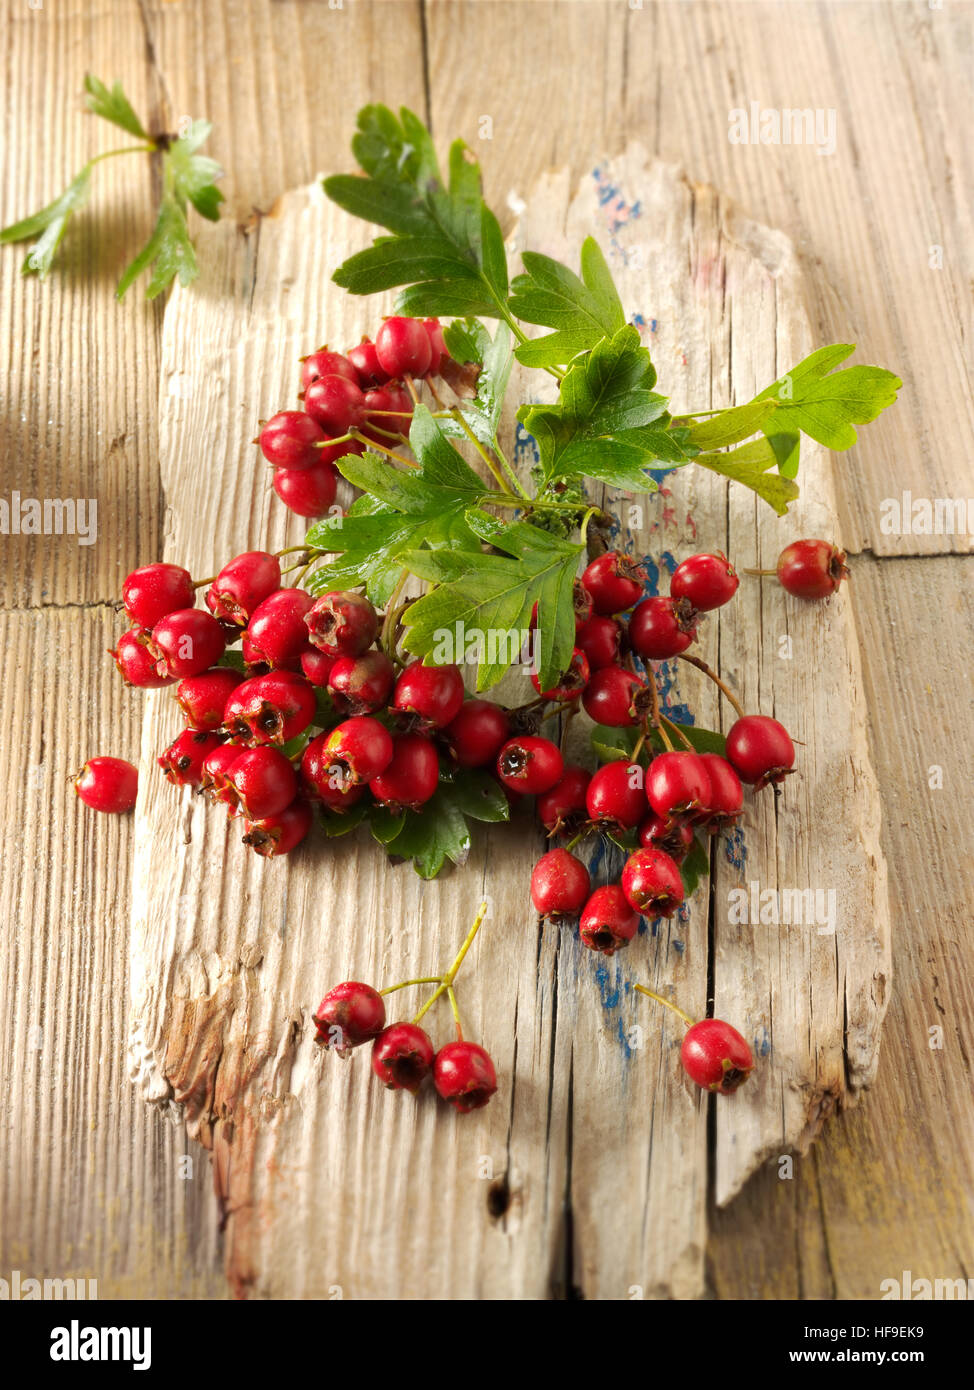 May-tree, whitethorn, or hawberry (Crataegus sp.), fresh berries and foliage on wood Stock Photo